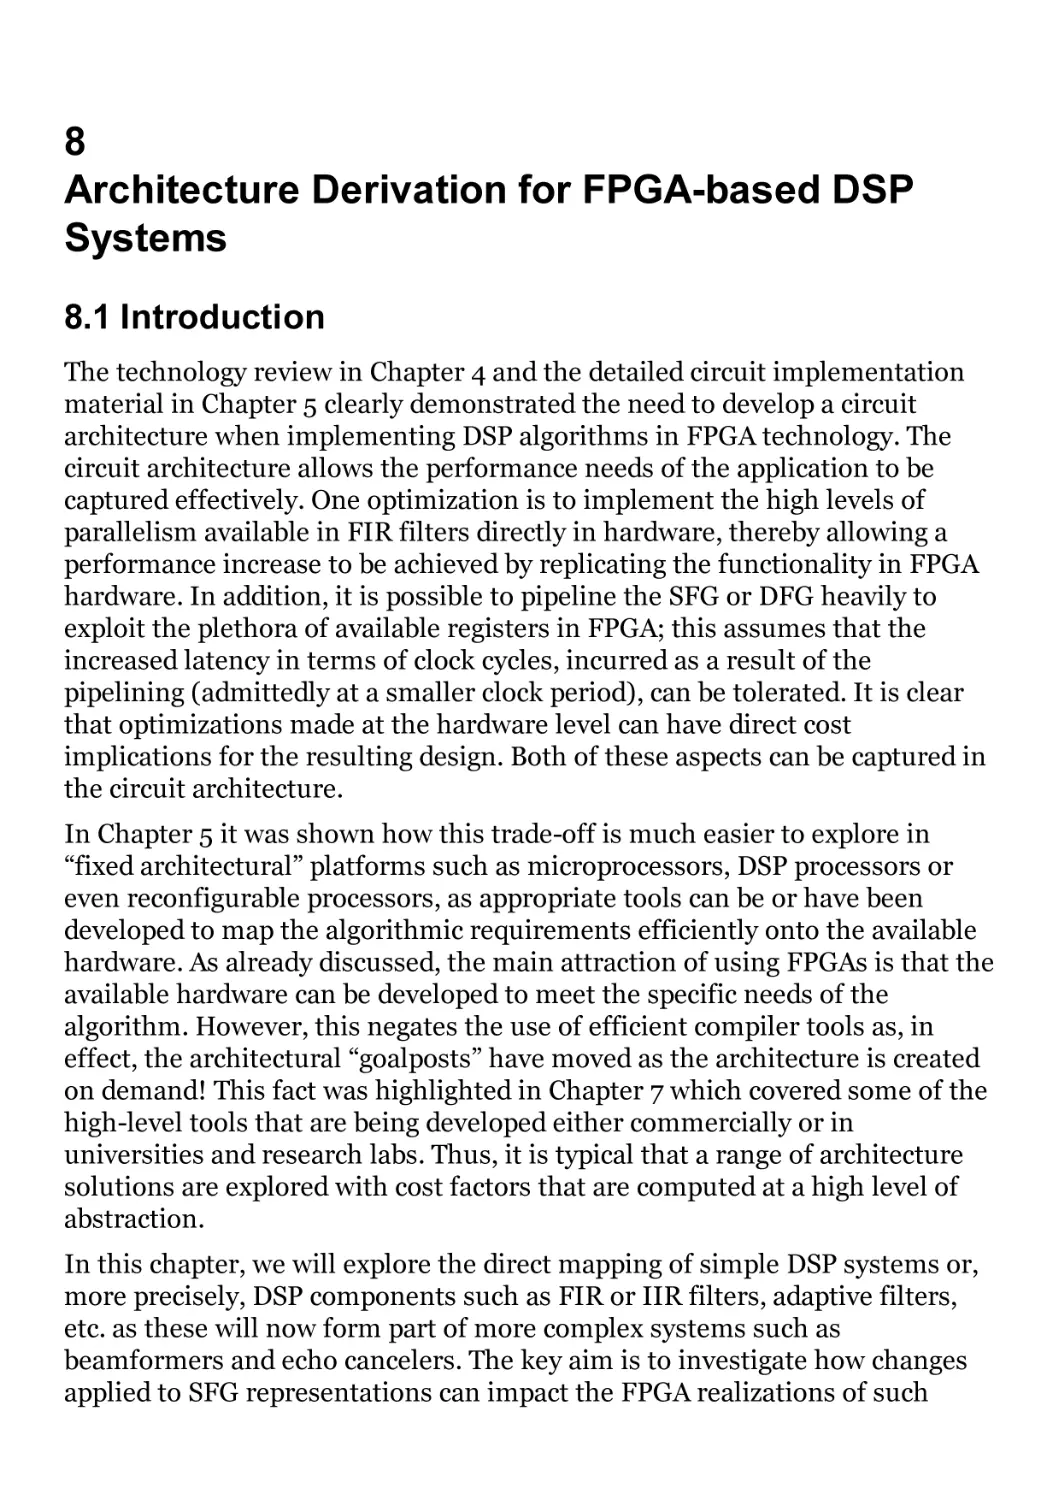 8 Architecture Derivation for FPGA-based DSP Systems
8.1 Introduction